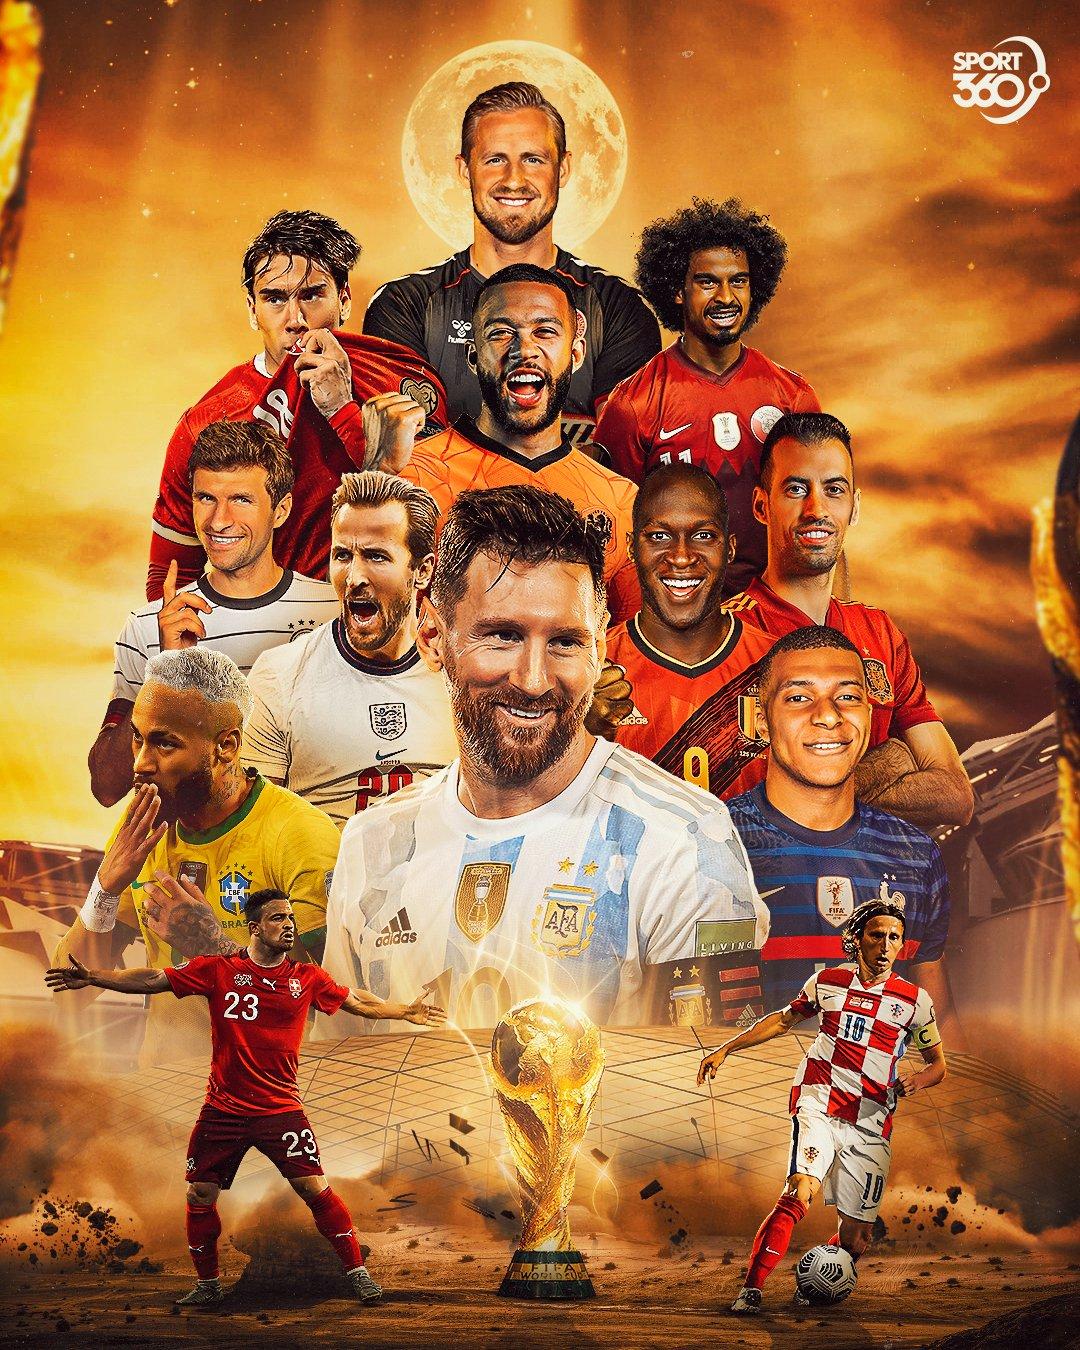 Top 25 Best Fifa World Cup Qatar 2022 Wallpapers  HQ 